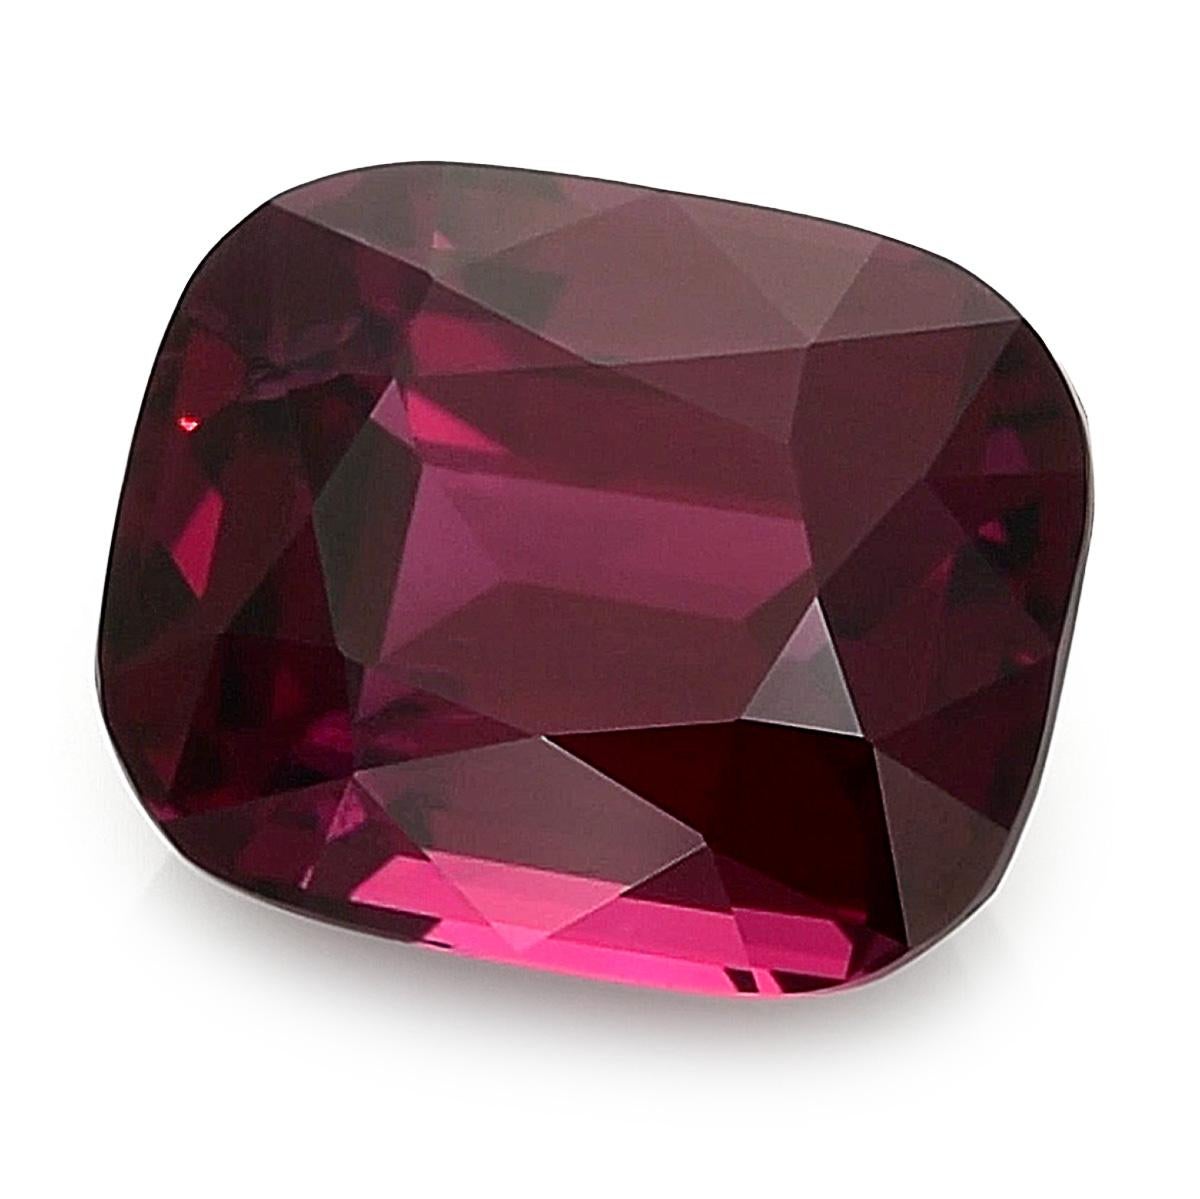 Discover an extraordinary Natural Garnet, boasting an impressive 10.08 carats. This gem, cut in a stunning Cushion shape with measurements of 13.26 x 10.78 x 7.66 mm, showcases a Brilliant/Step cut that enhances its brilliance. The intense Red